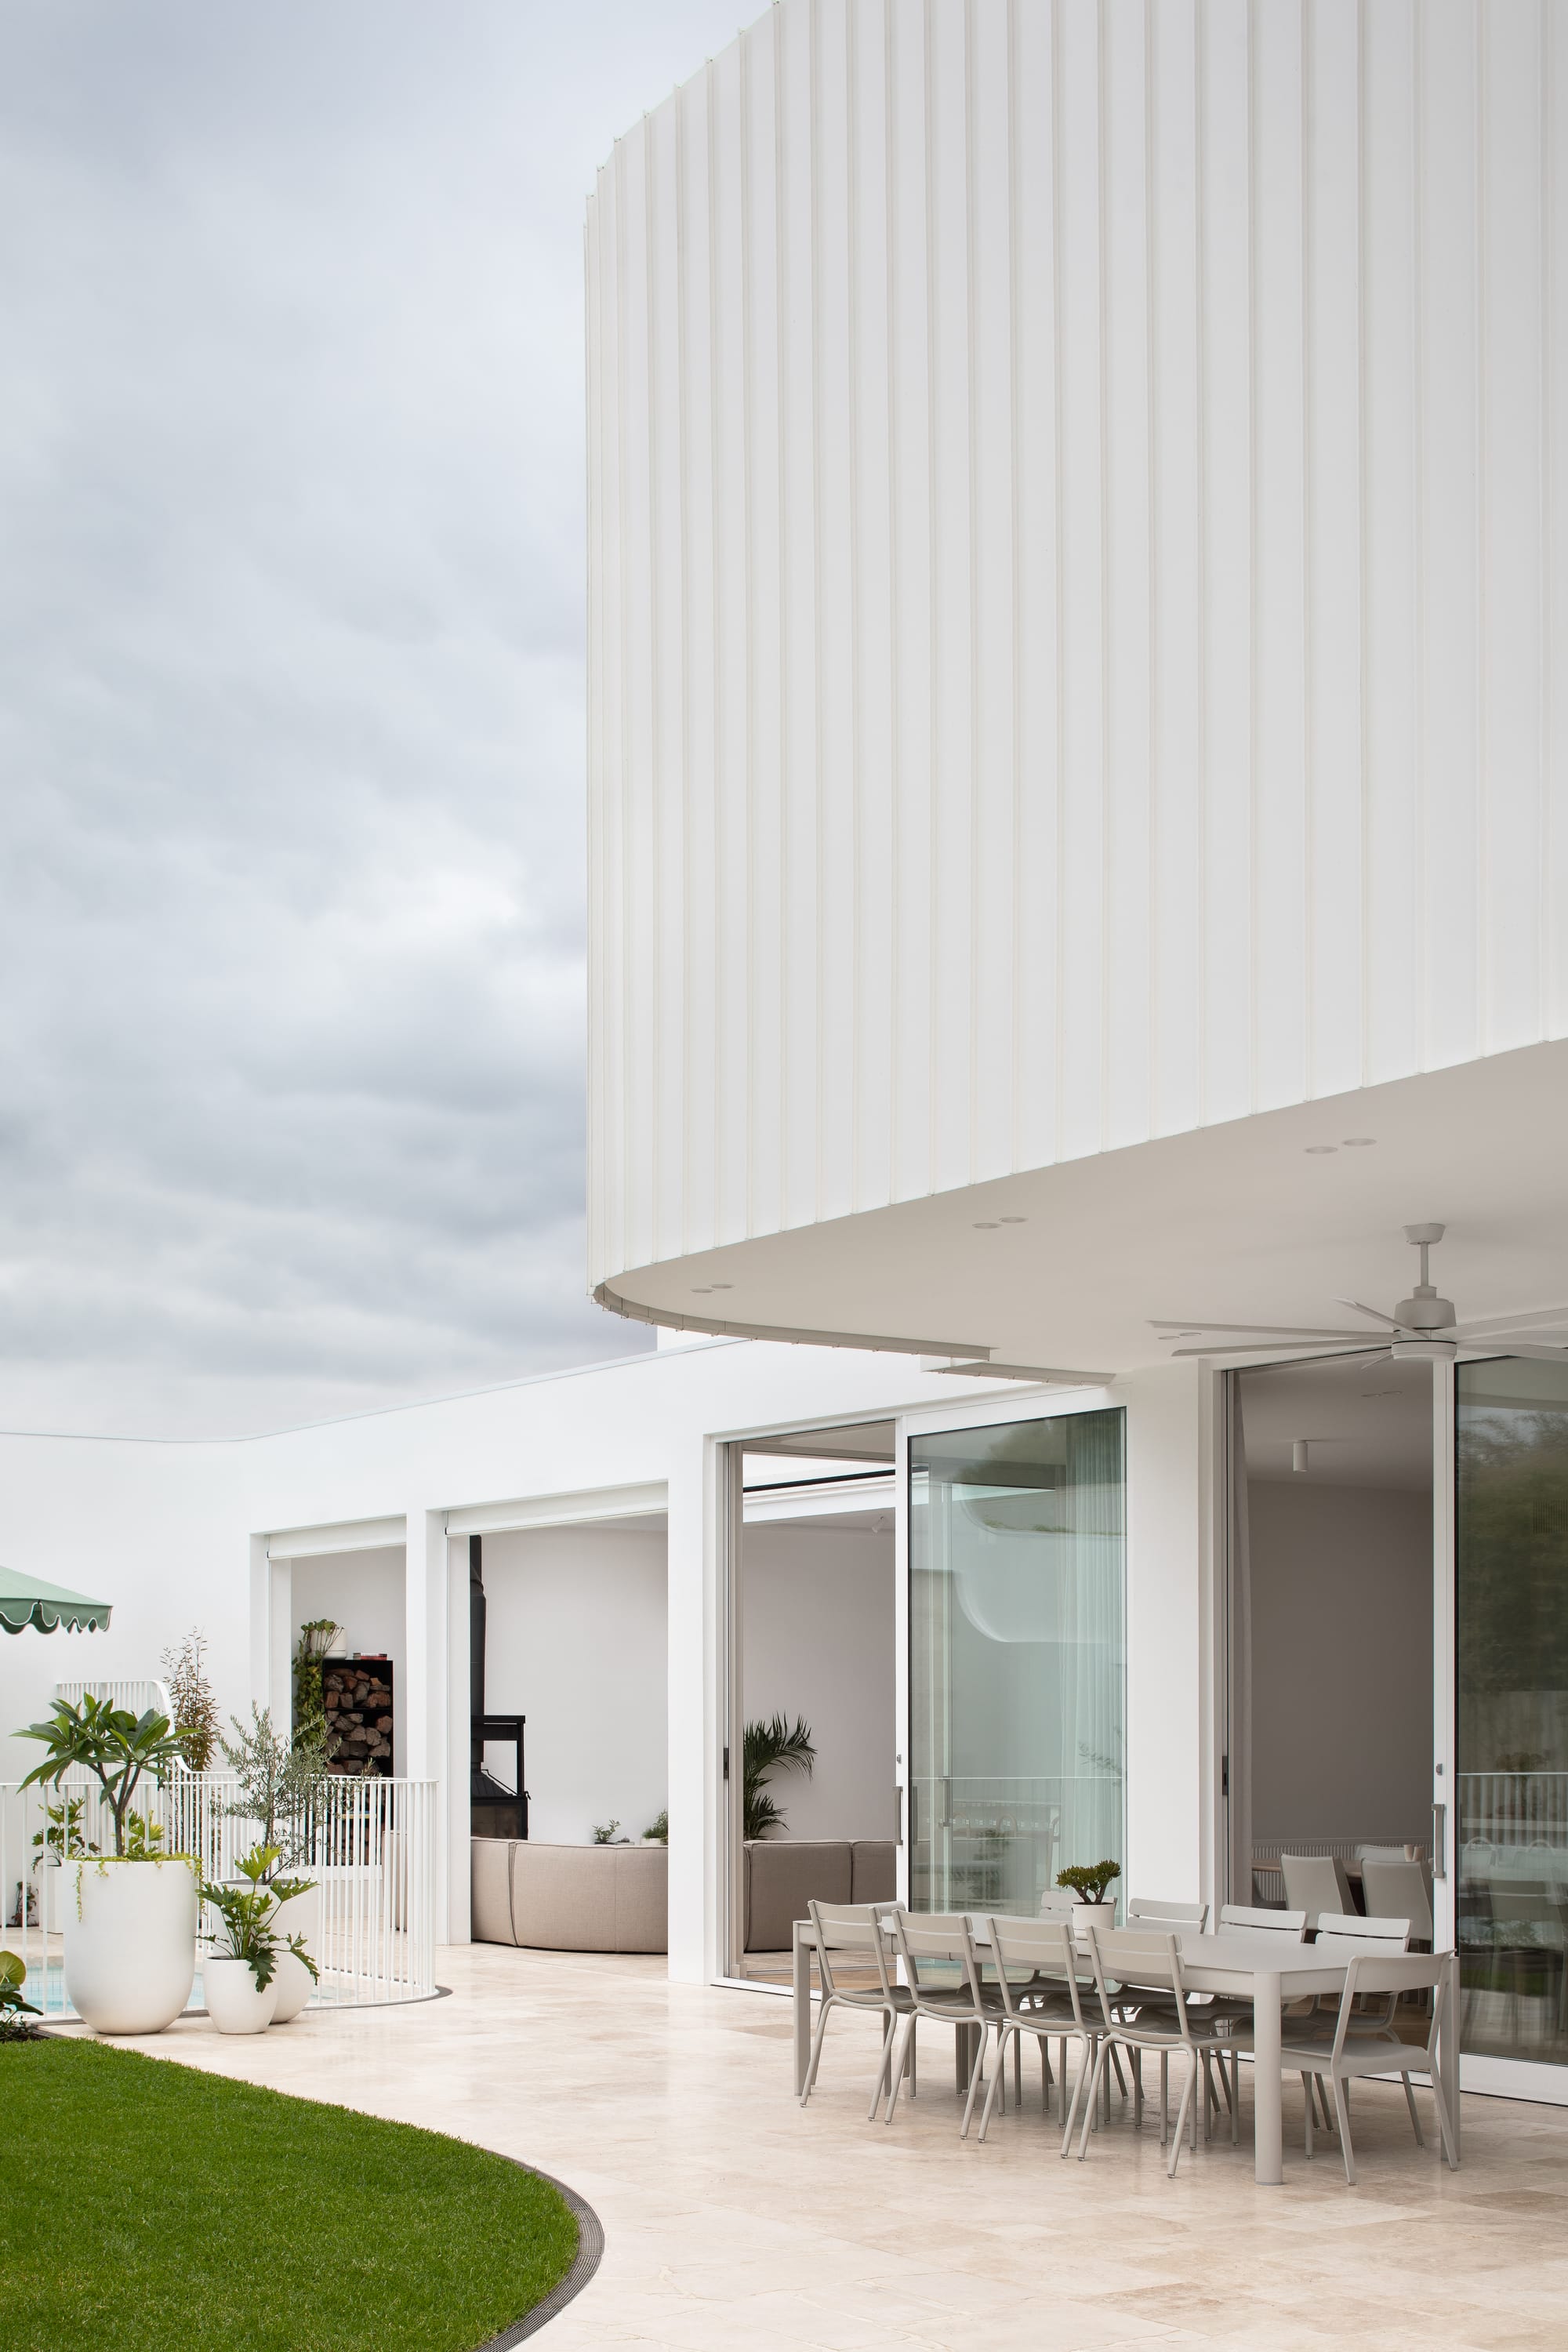 The Grove by Taouk Architects.A modern outdoor dining area adjacent to a minimalist white house with a distinctive vertical profile. The patio area is furnished with a long dining table and chairs, set up for an alfresco dining experience. The house features expansive glass doors that open to seamlessly connect the interior with the exterior, and the landscaped garden adds a touch of greenery to the scene.